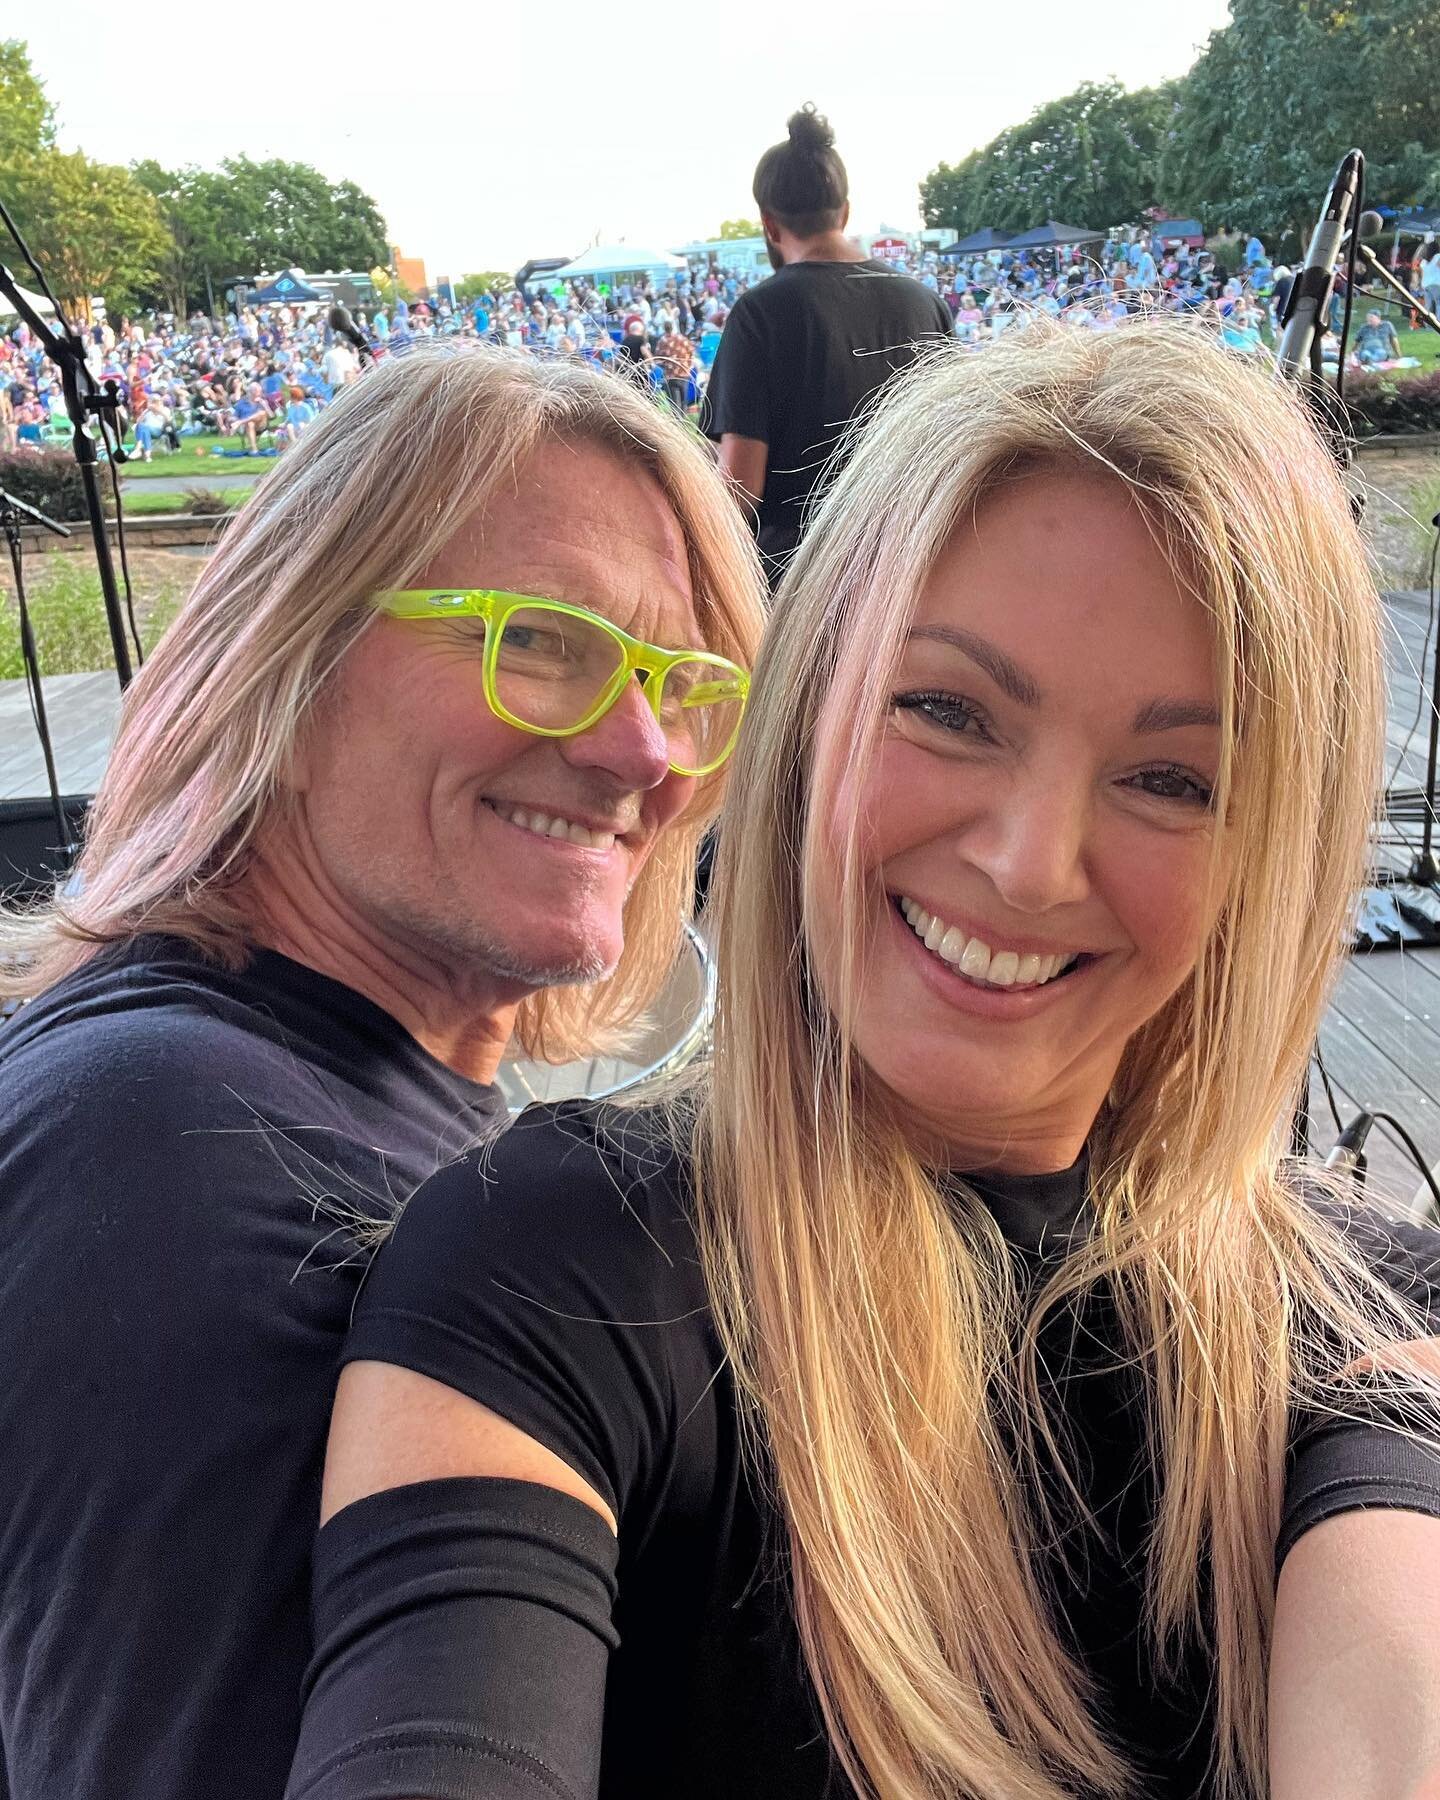 Good times tonight at SouthPark After 5!! What a great crowd!  Thank you all for the love and support! AND a BIG HAPPY BIRTHDAY shout out to my friend the one and only Mr @donniemarshall59 !! Thanks for choosing to play drums with me on your very spe